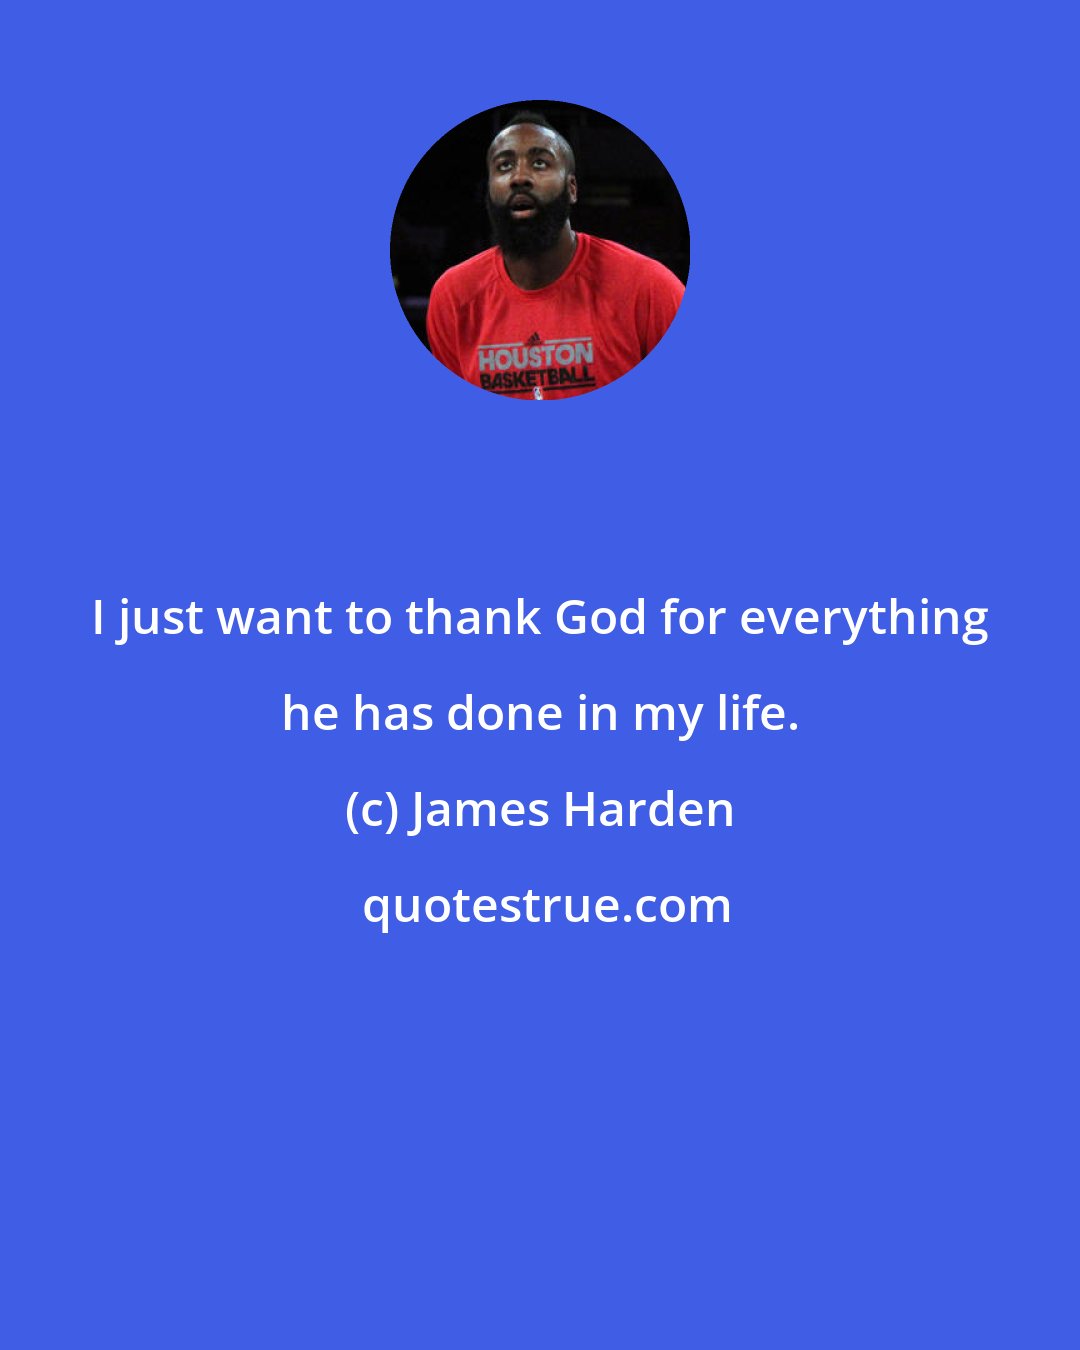 James Harden: I just want to thank God for everything he has done in my life.